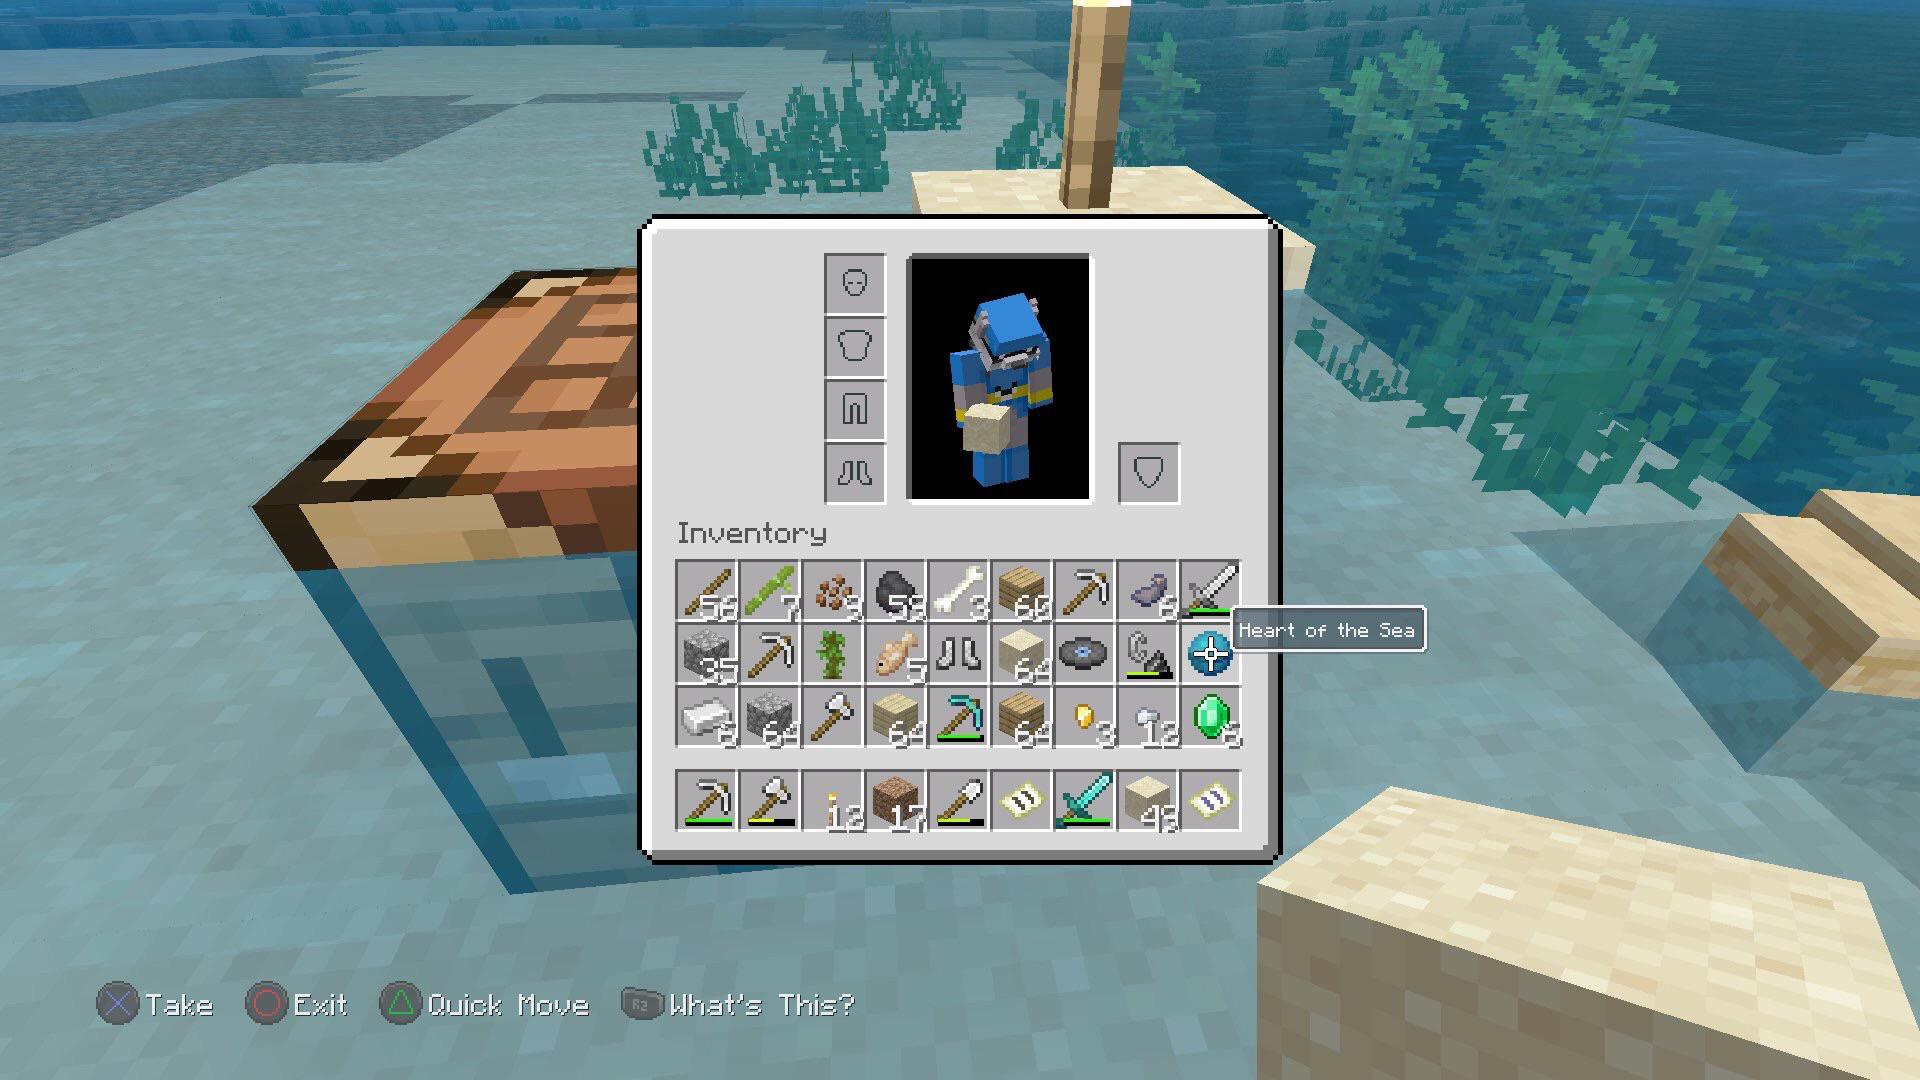 How To Get The Heart Of The Sea In Minecraft